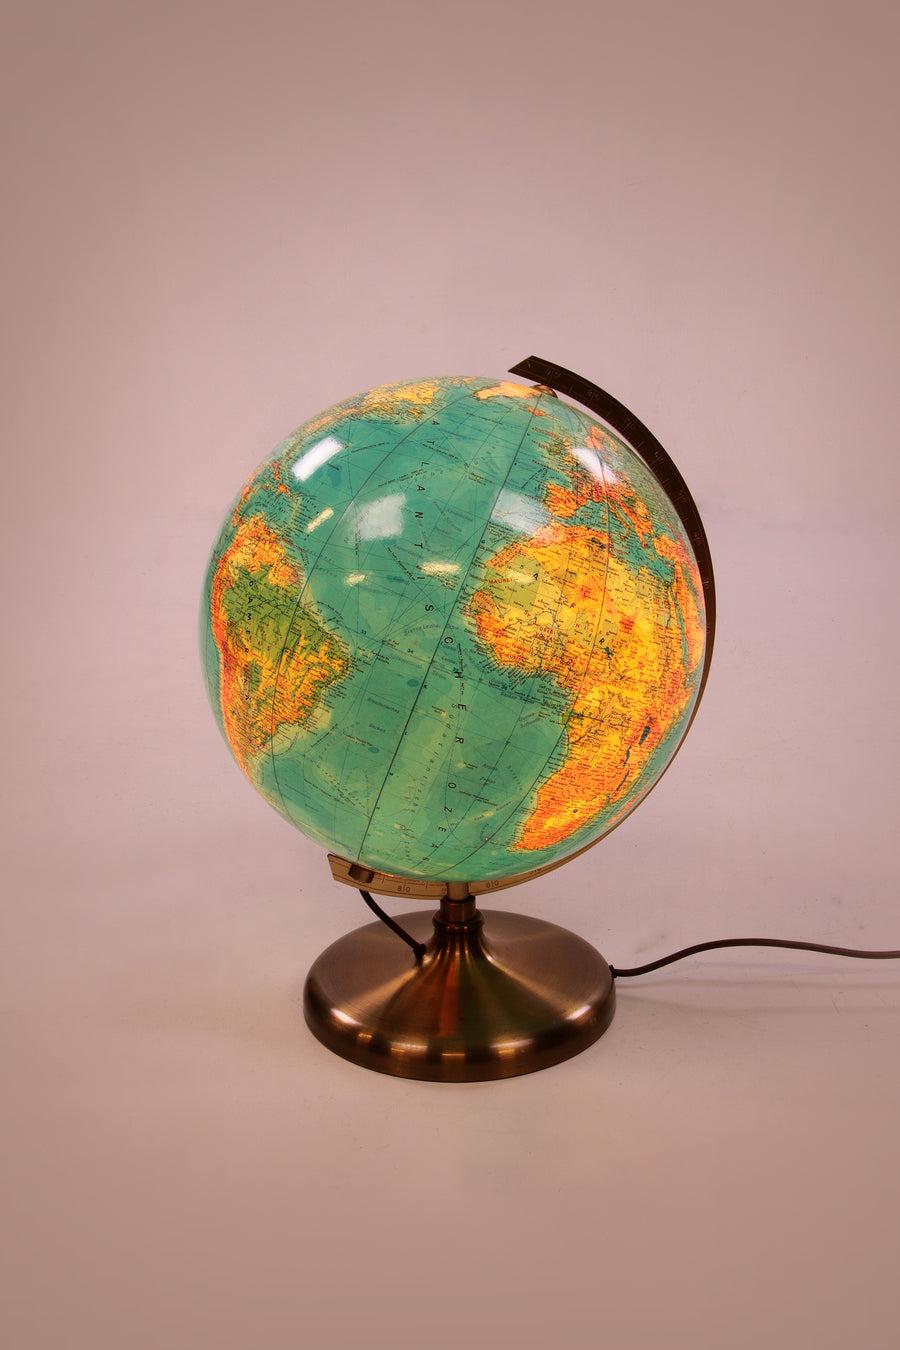 Glass Globe With Light in It From Jro Verlag Munchen, Germany 

This beautiful vintage globe has a brass-colored base.

This globe comes from the 1970s and is made in Germany.

Made by JRO Verlag Munchen.

The globe is equipped with lighting. In a